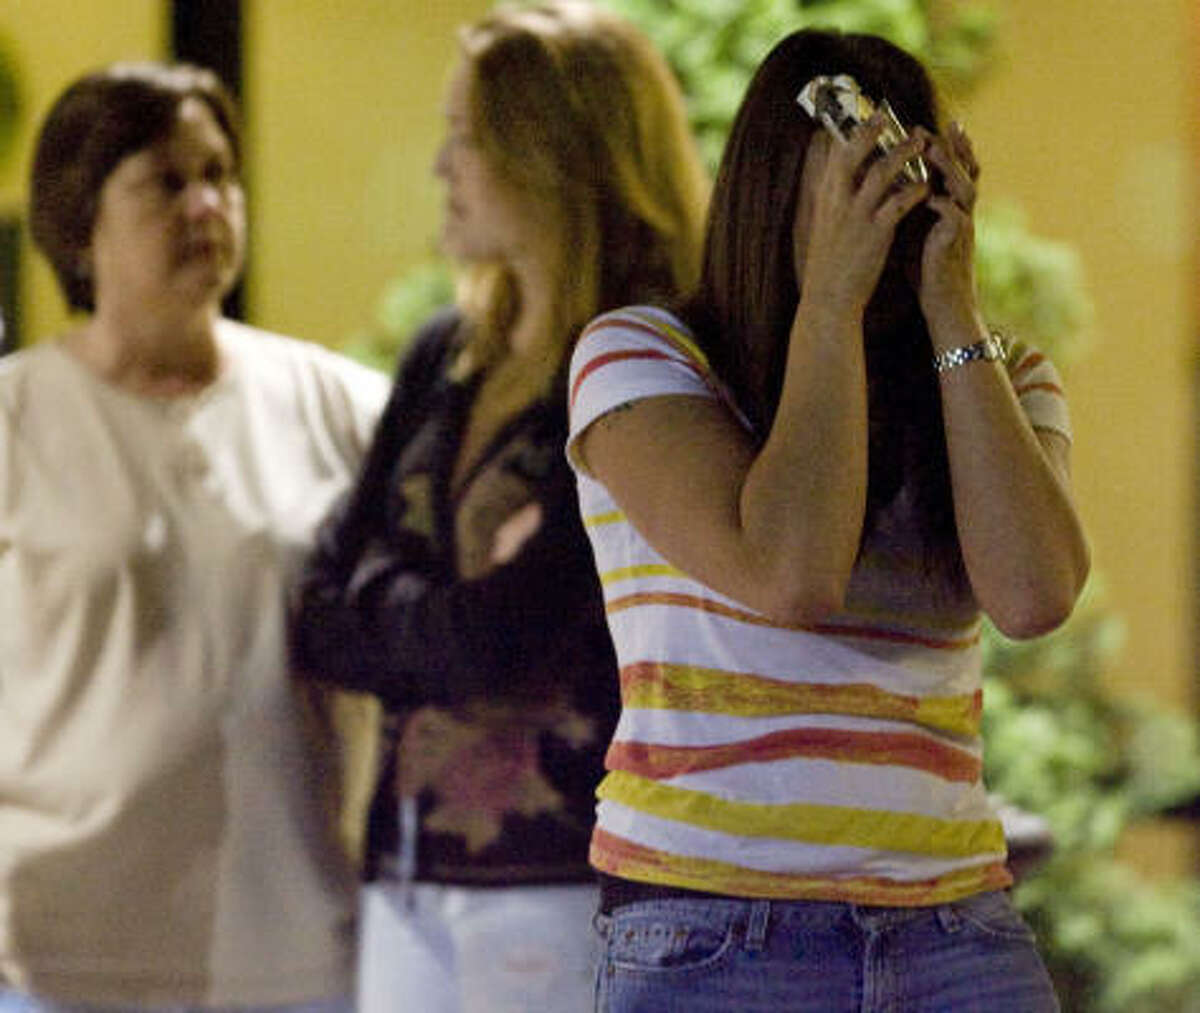 Micalet Kemp, right, throws her hands up in an act of emotion,Thursday April 22, 2010. At the Crowne Plaza hotel in Kenner La. knowing her loved one is still missing in the aftermath of the Deepwater Horizon oil rig explosion.